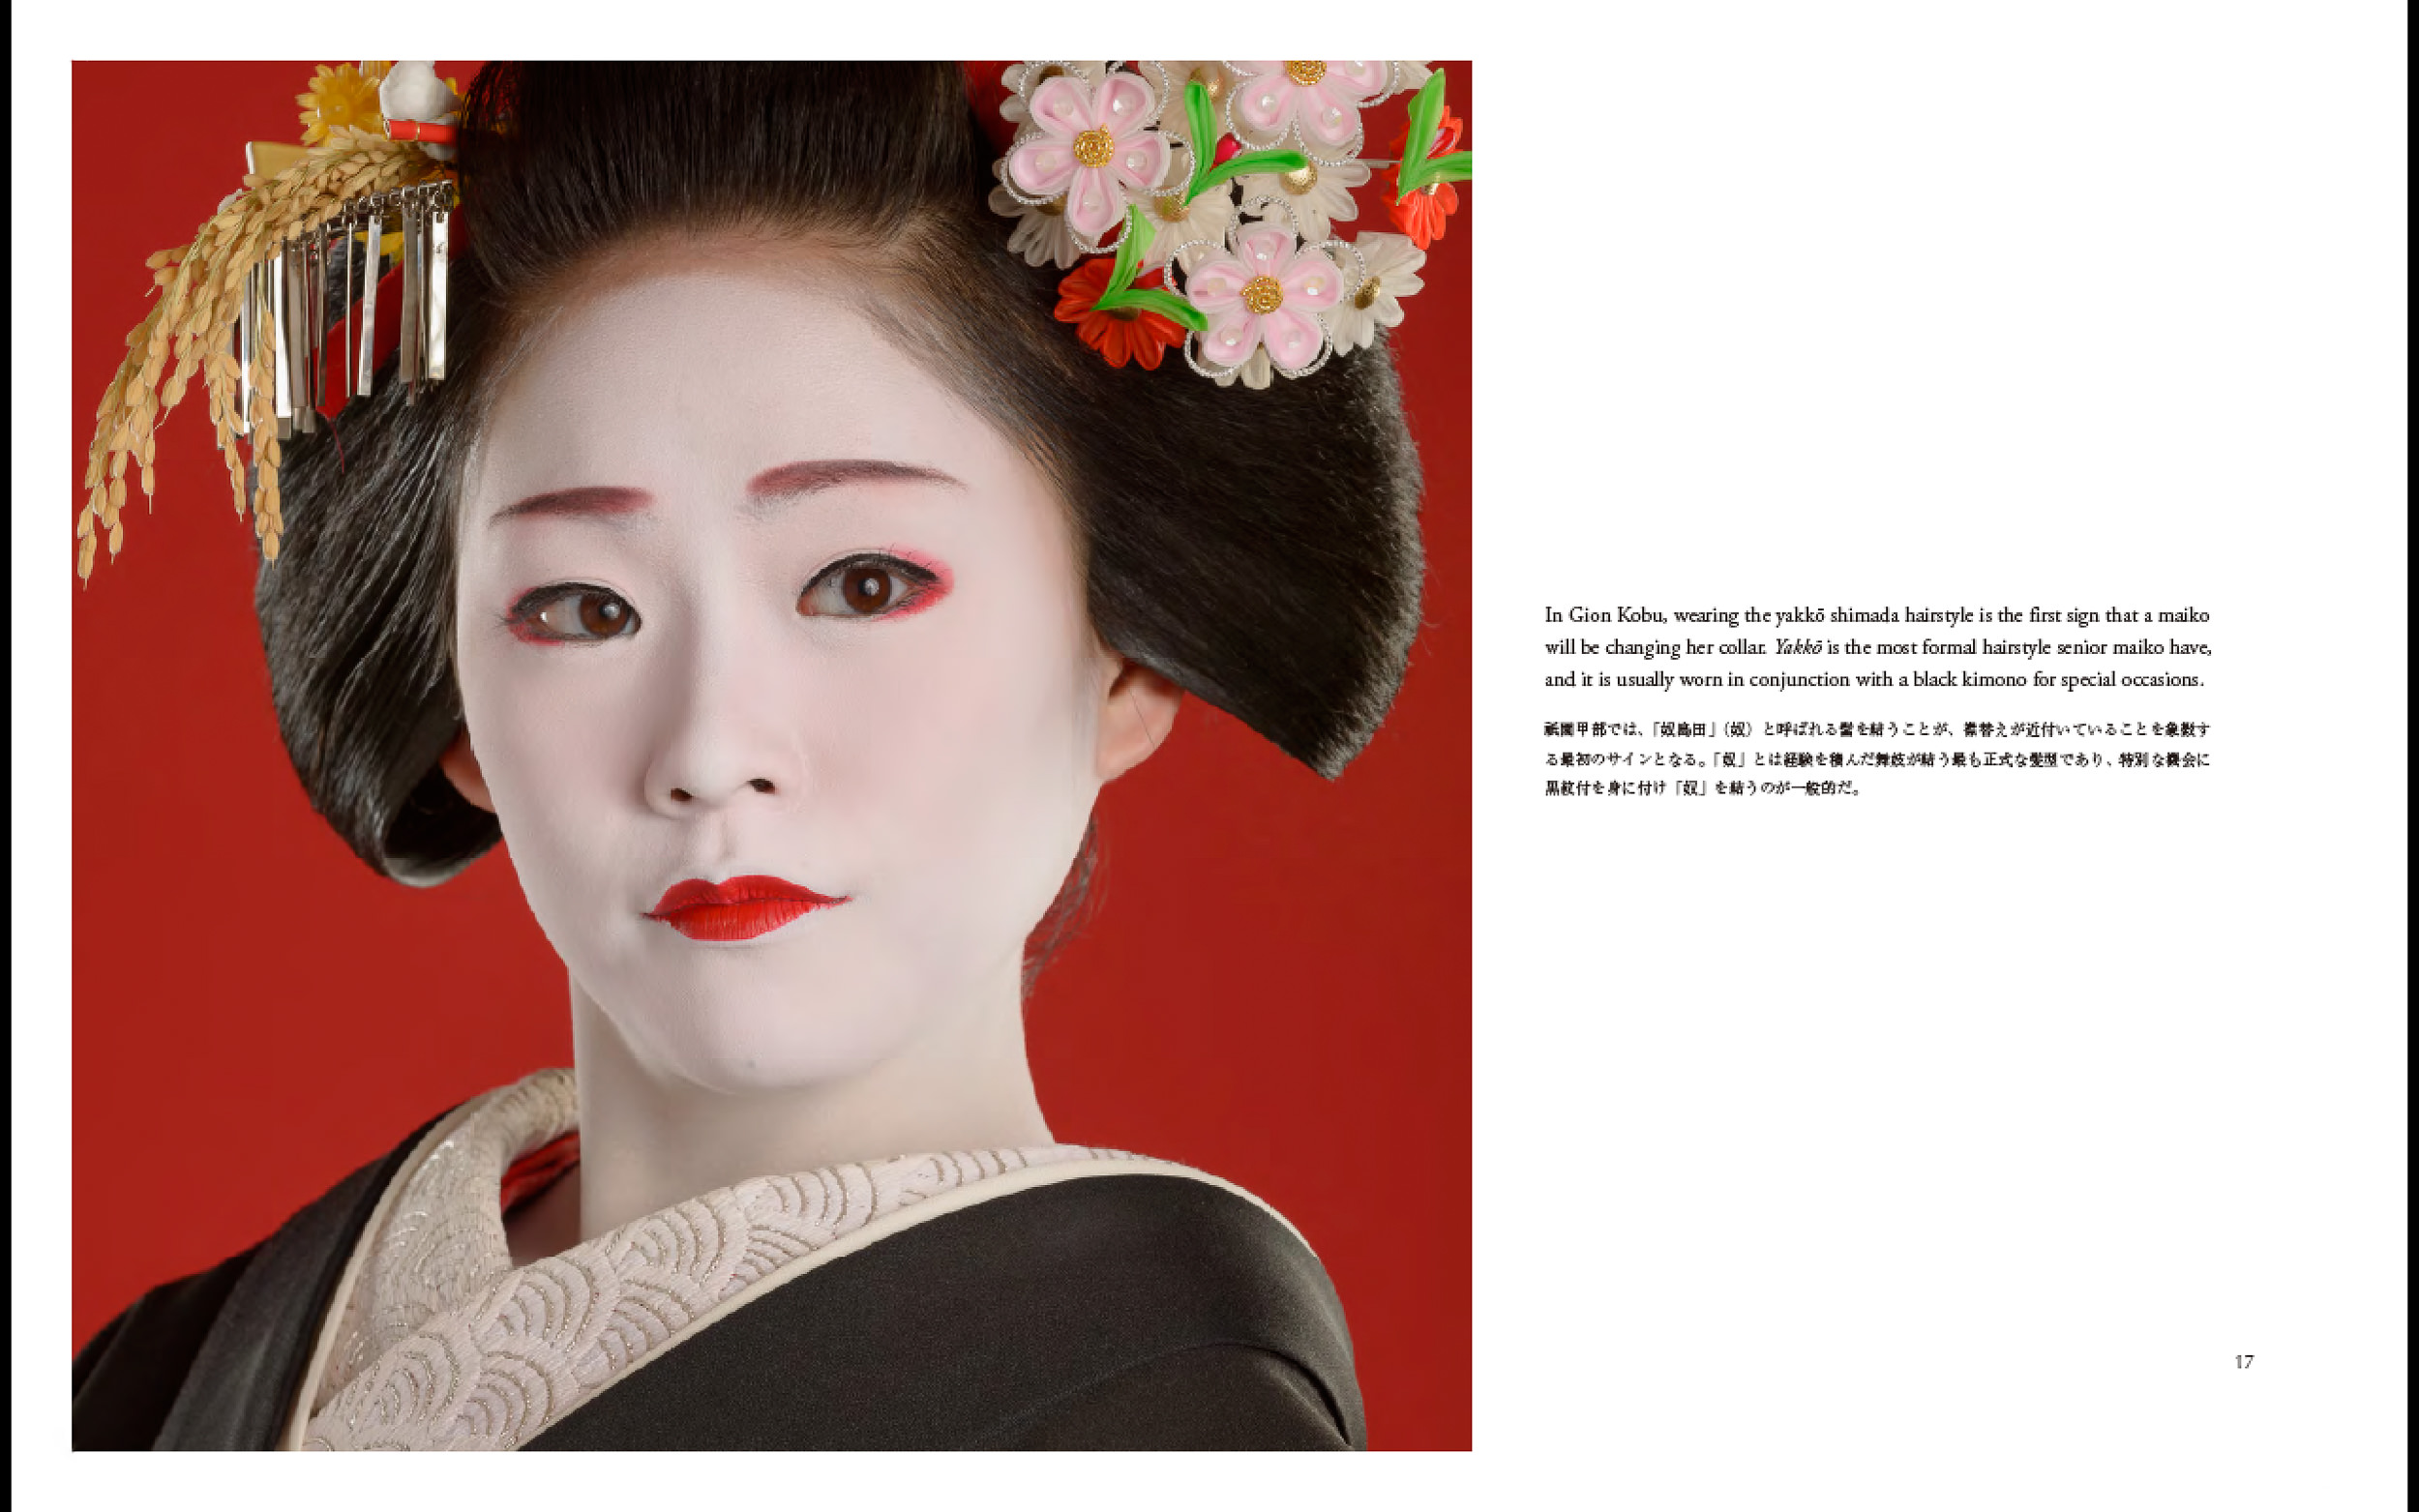 Now-a-Geisha-pages-16-17.jpg